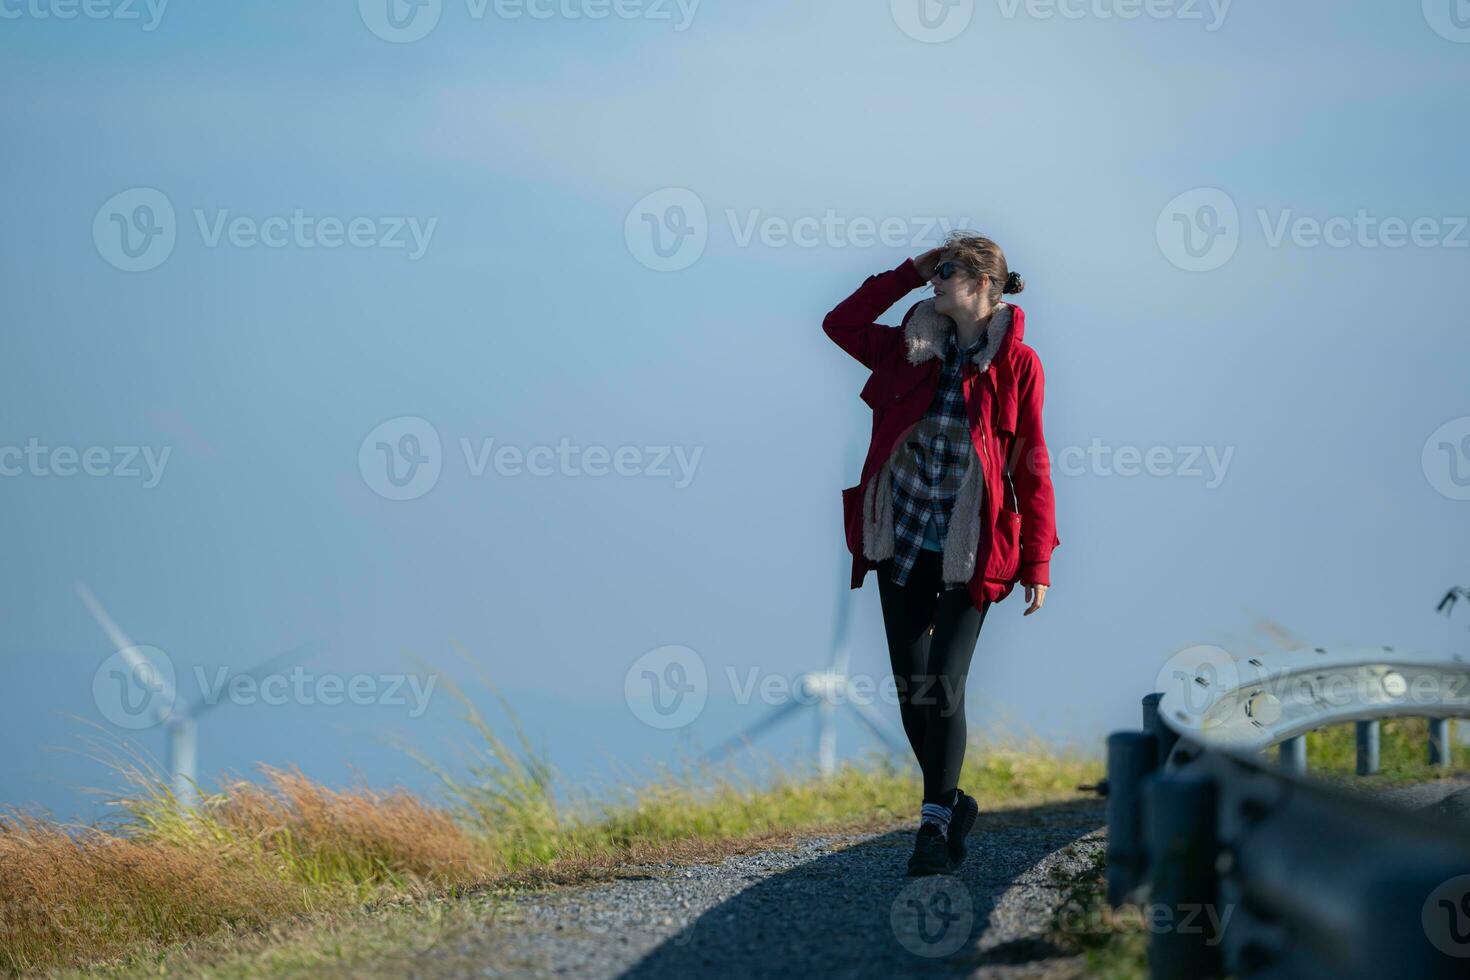 On the background of windmills, A young woman in a red jacket is enjoying her winter vacation. photo